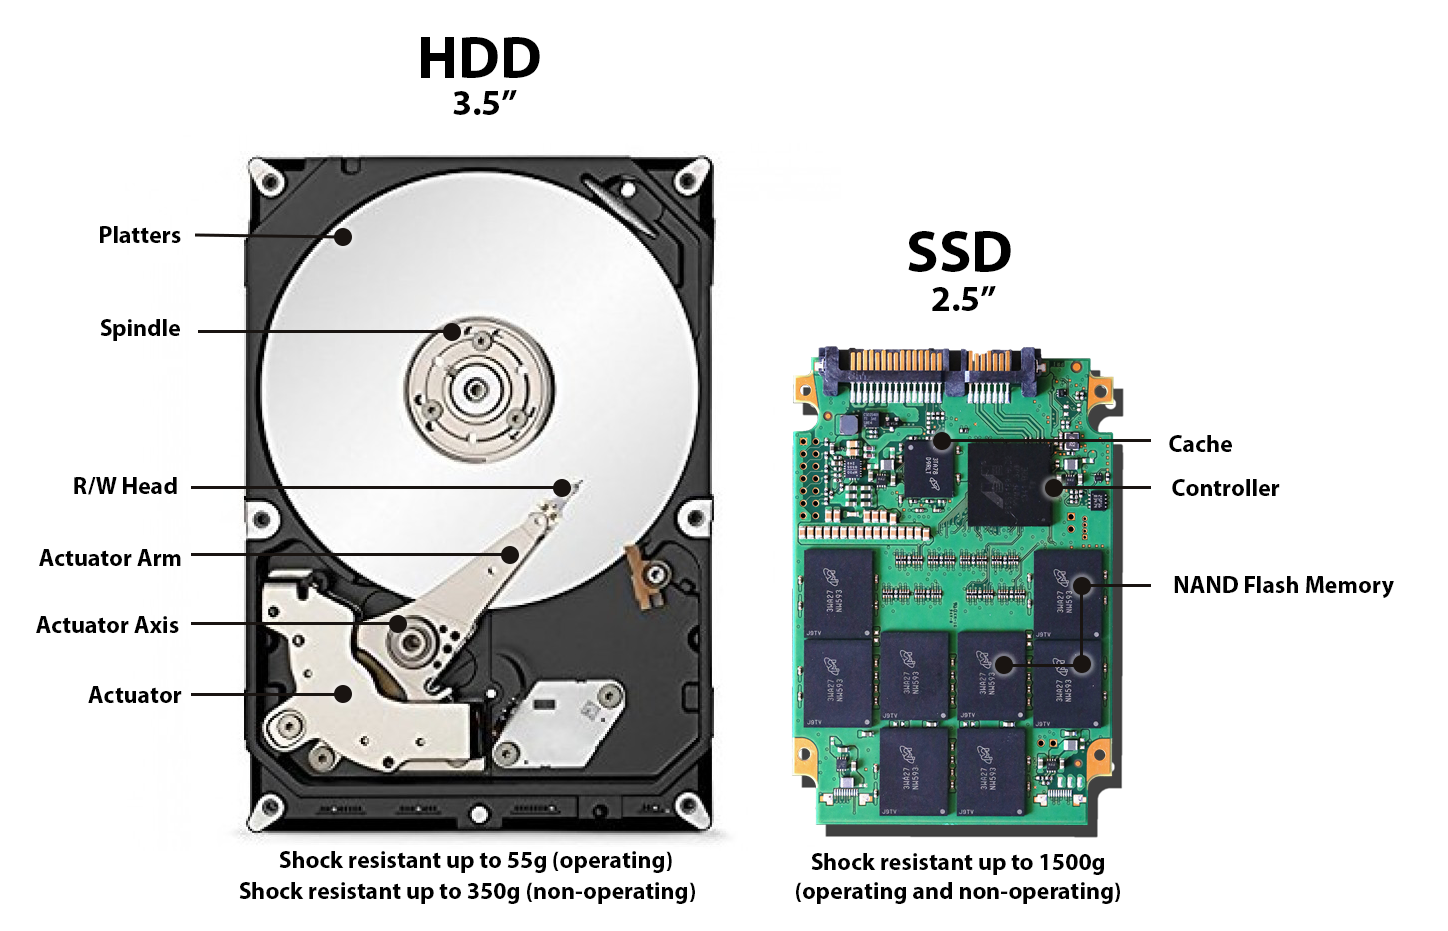 What is HDD and SSD?